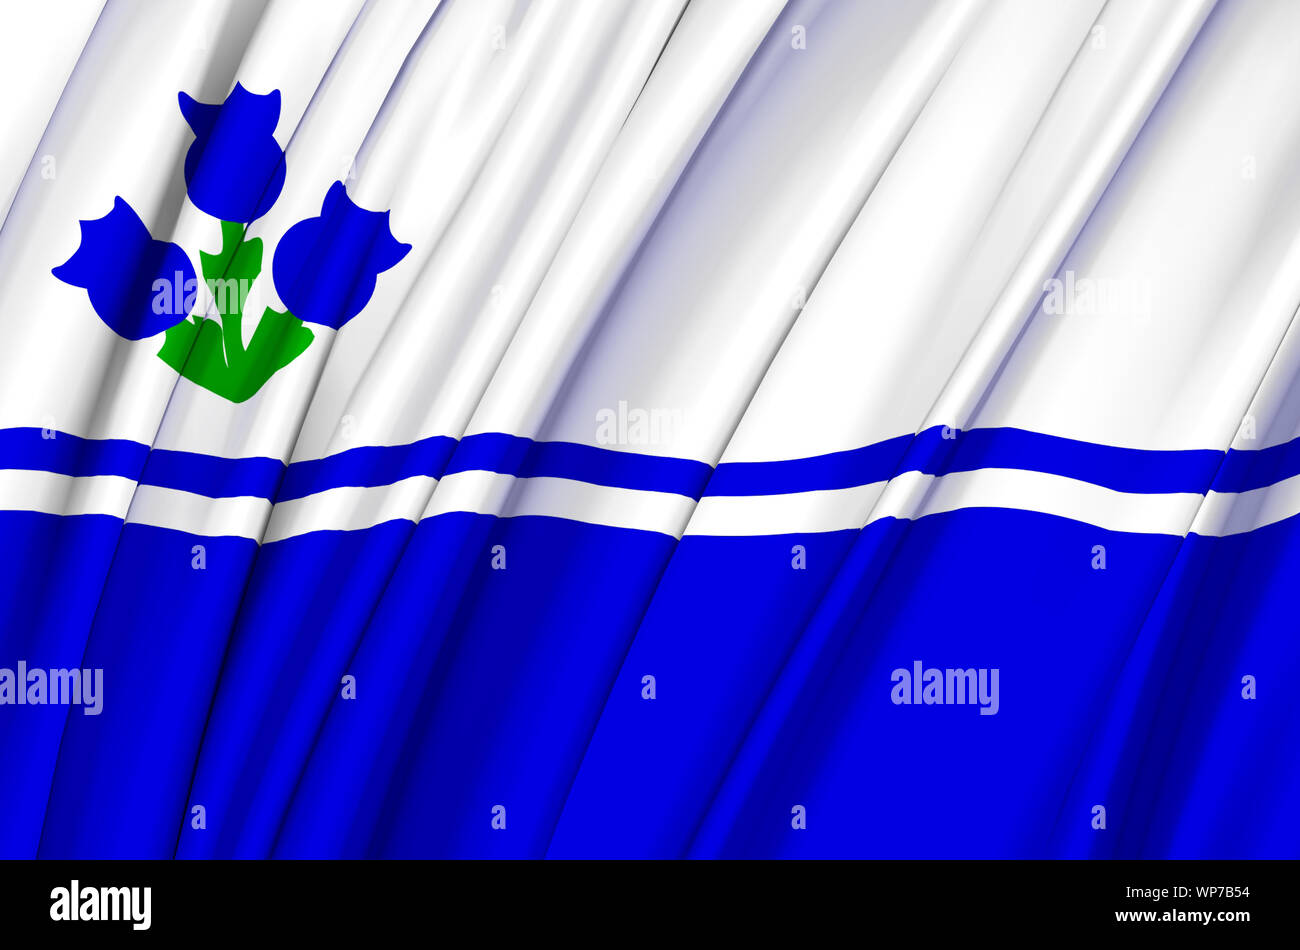 Drapeau Du Lac-Saint-Jean waving flag illustration. States, cities and Regions of Canada. Perfect for background and texture usage. Stock Photo